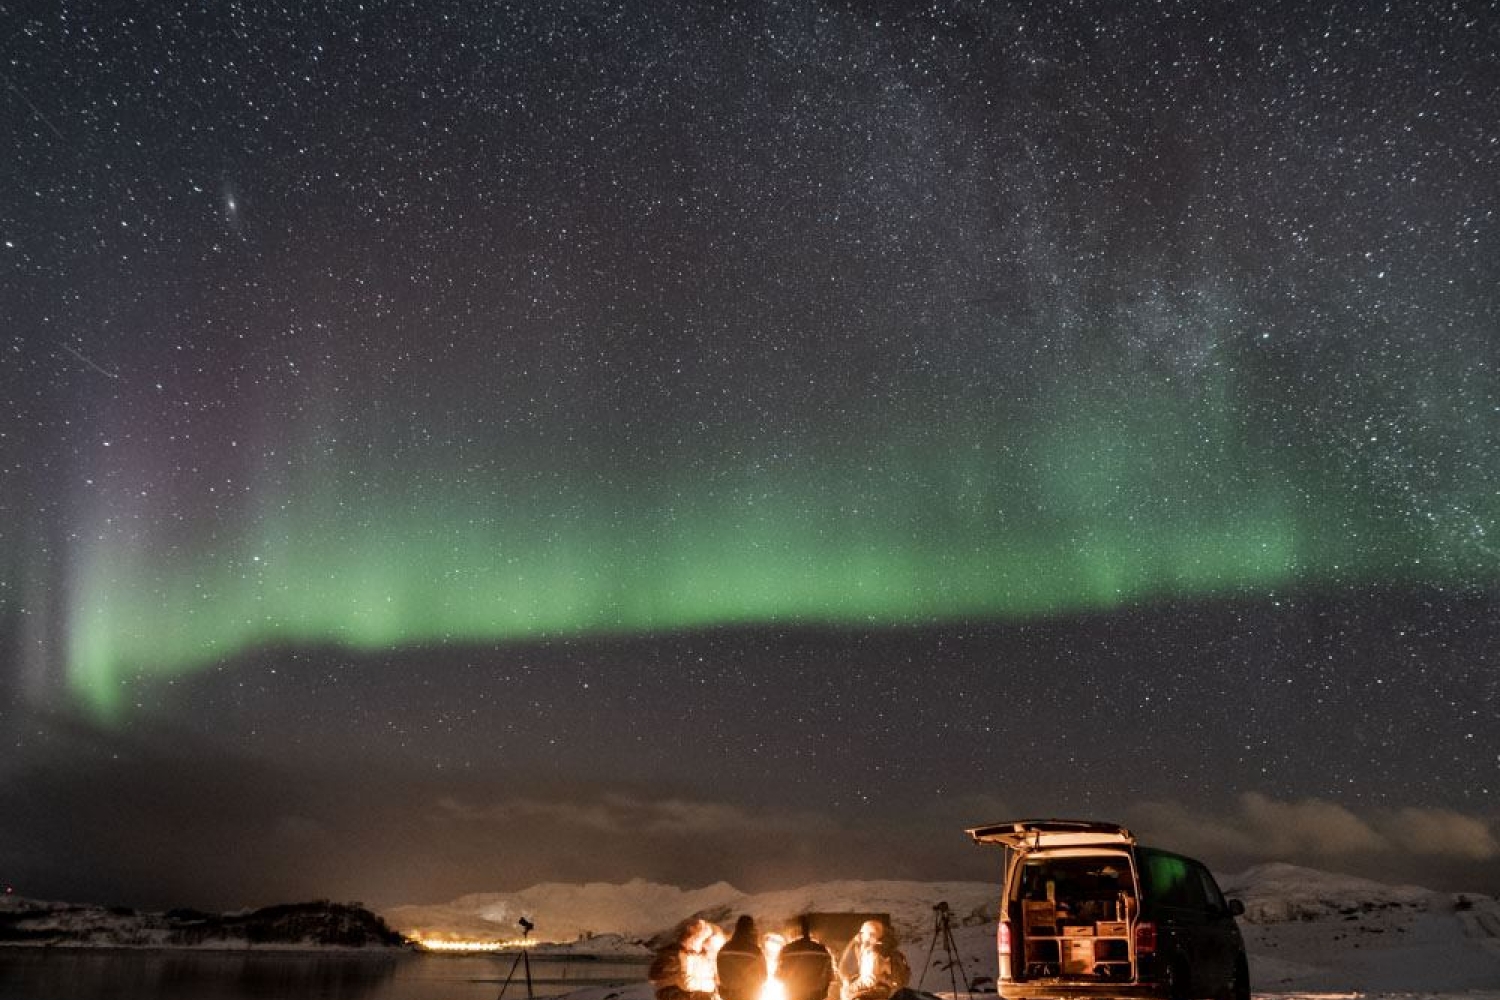 Private | "a journey in search of the Northern Lights" Ⓥ | Photography | 4x4 VW Van